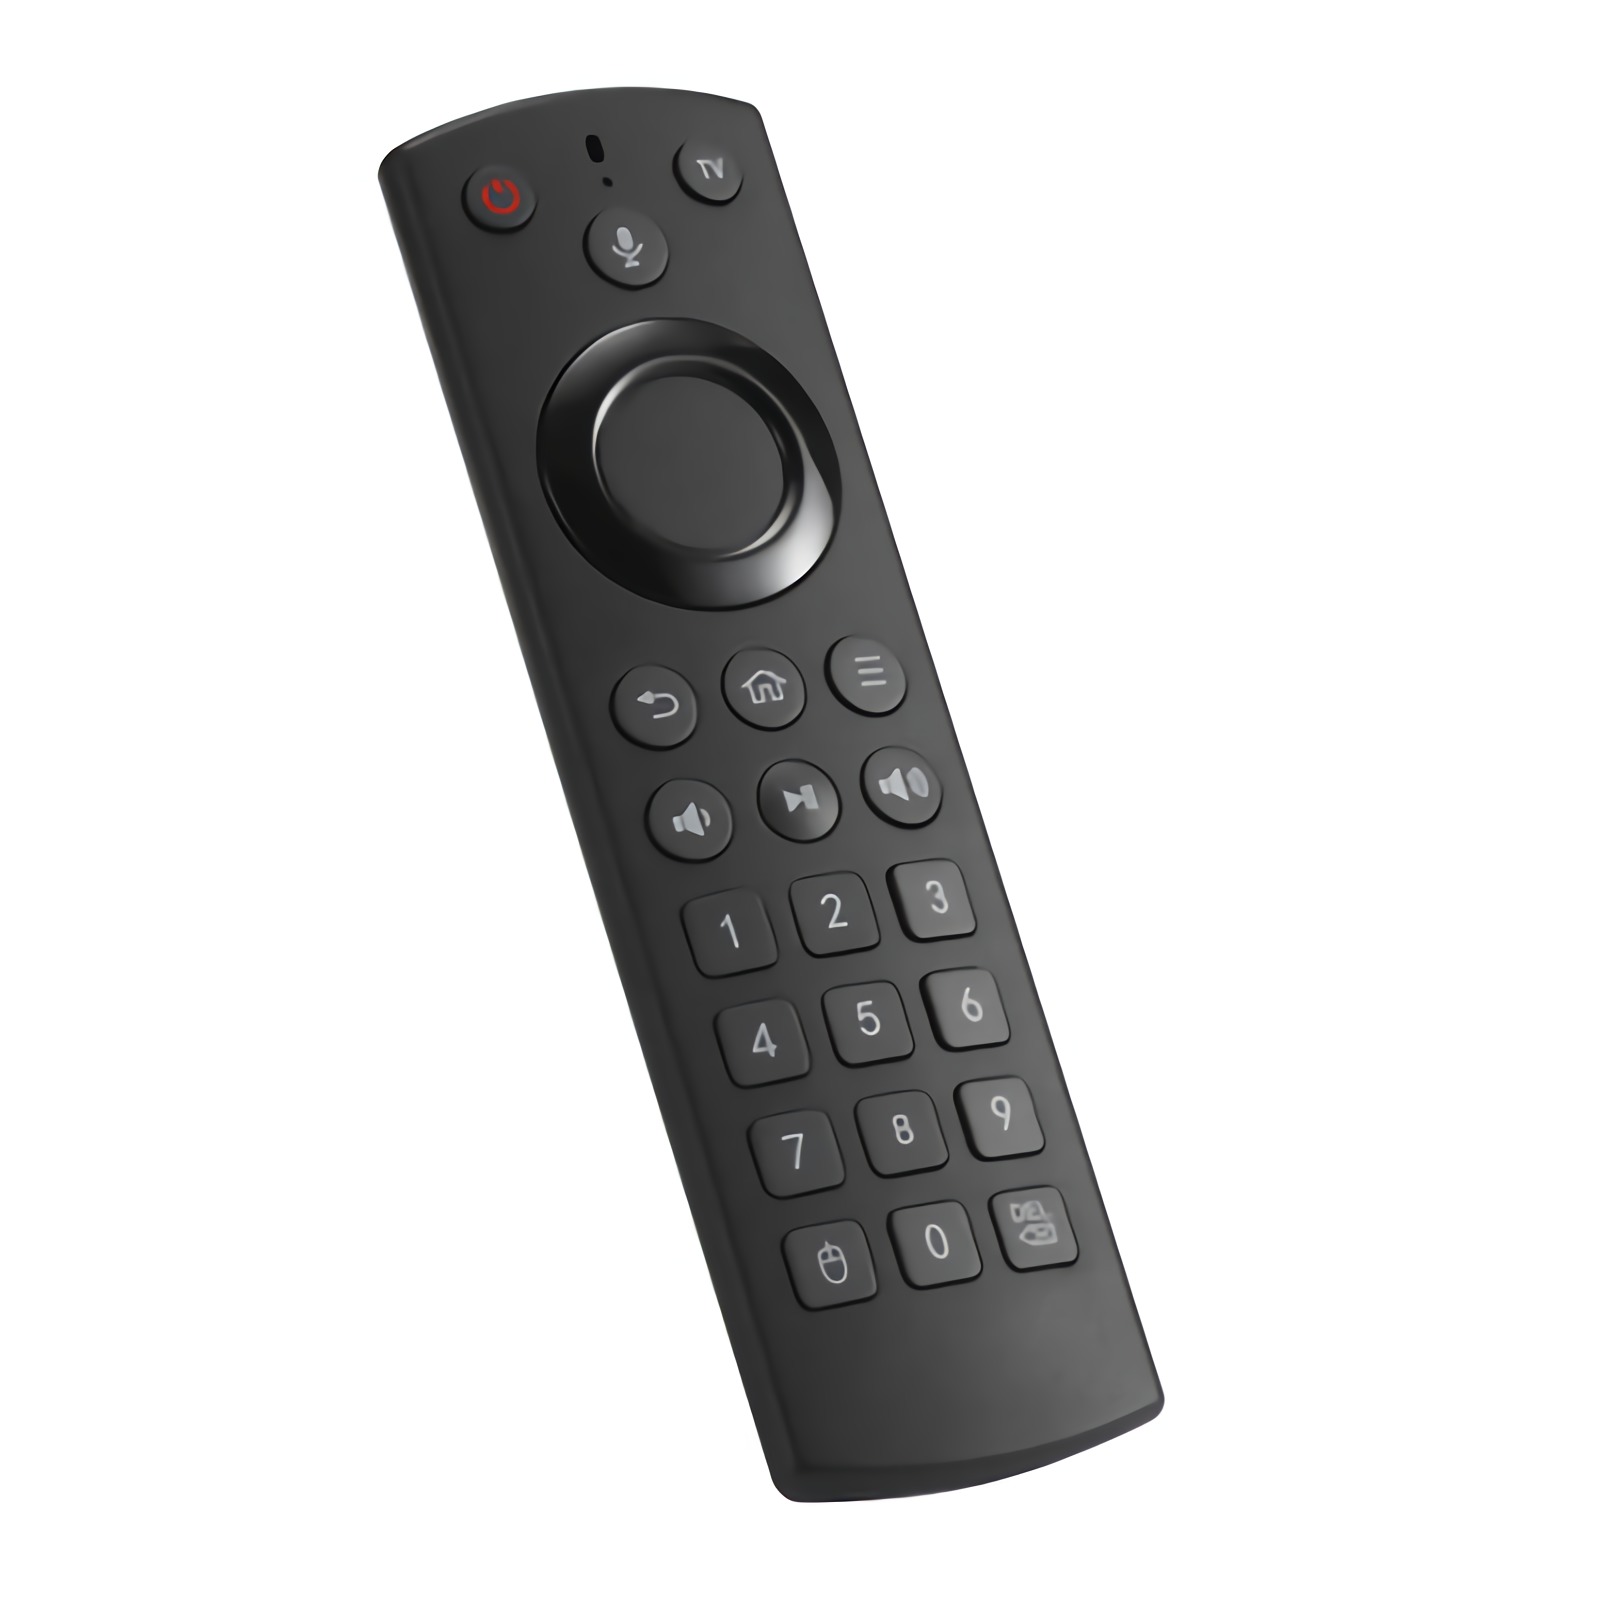 Find Unuiga U26 Vioce Control Air Mouse 2 4G 6 Axis Remote Control for Sale on Gipsybee.com with cryptocurrencies